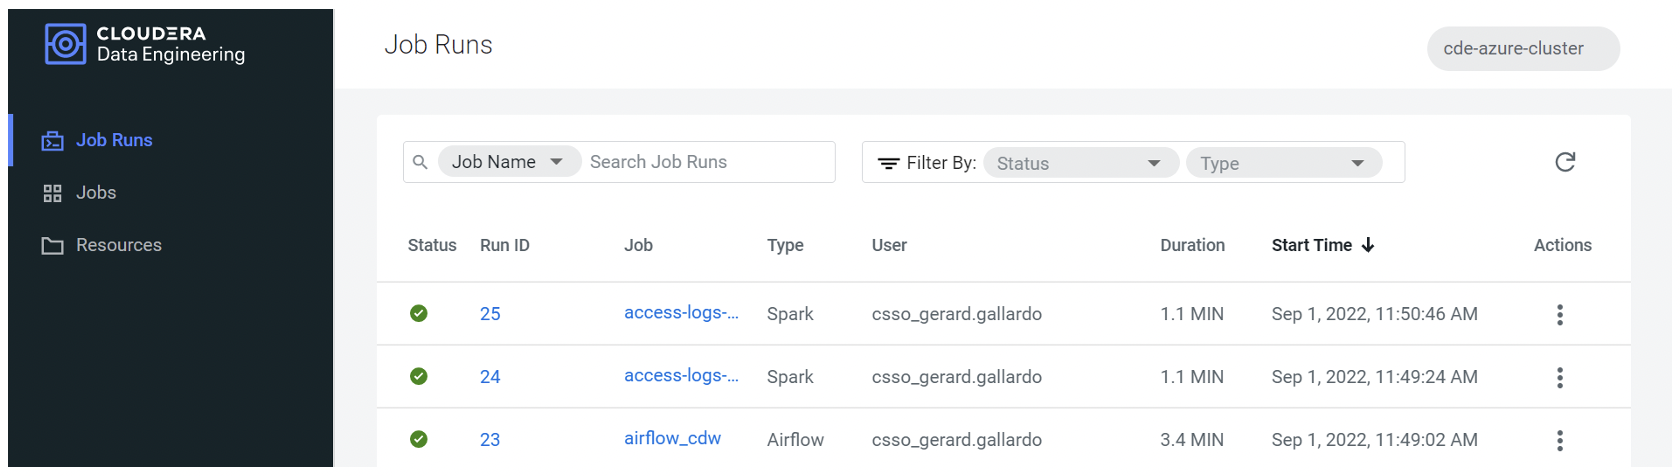 CDW query being executed together with the Spark tasks in the scheduled Airflow job screenshot